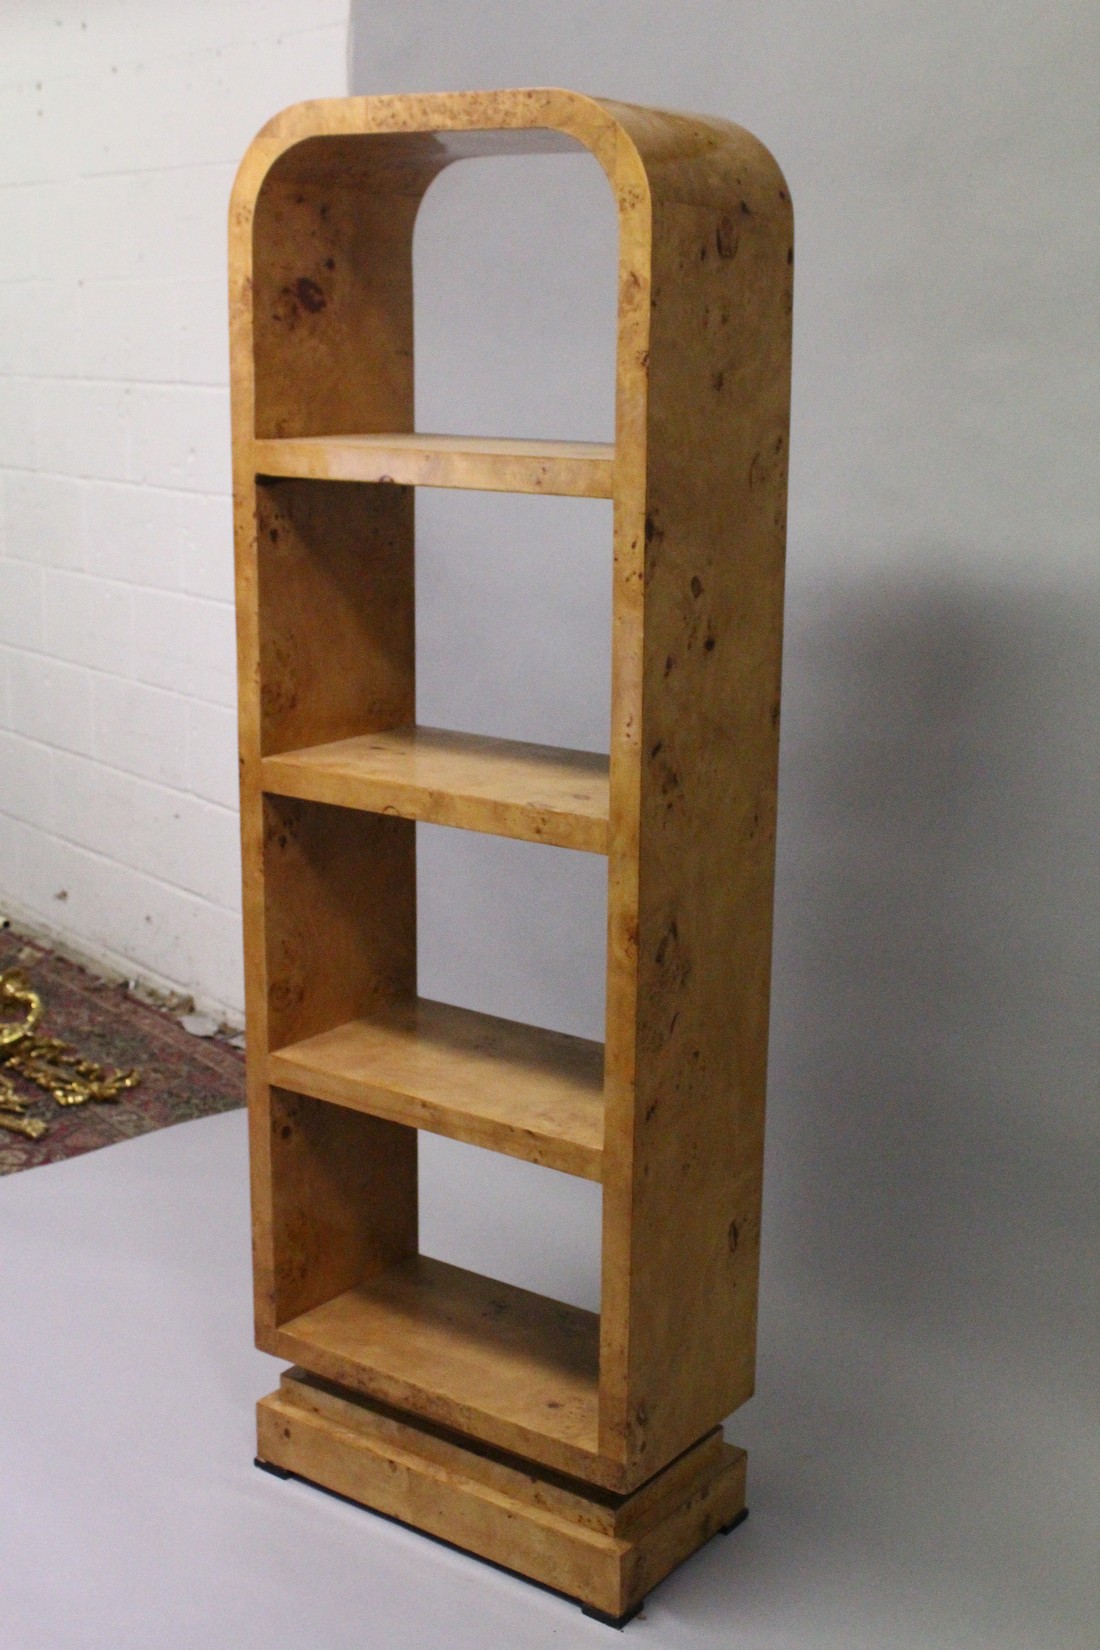 AN ART DECO STYLE BURR WOOD FREE STANDING OPEN BOOKSHELF, with four shelves on a platform base. - Image 3 of 3